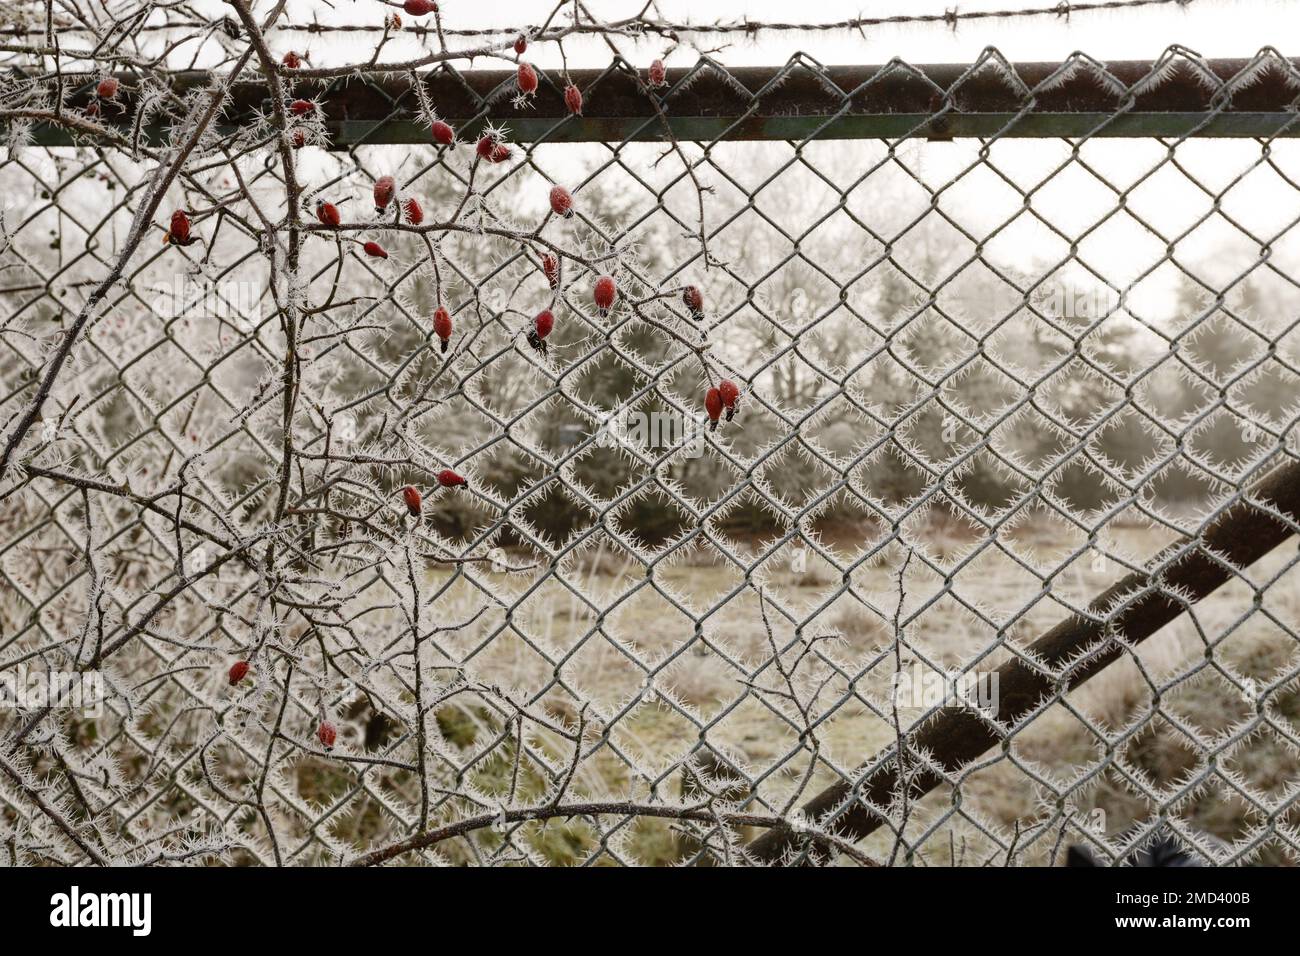 Rose hips with hoar frost like tiny icicles clinging to link chain fence. Stock Photo